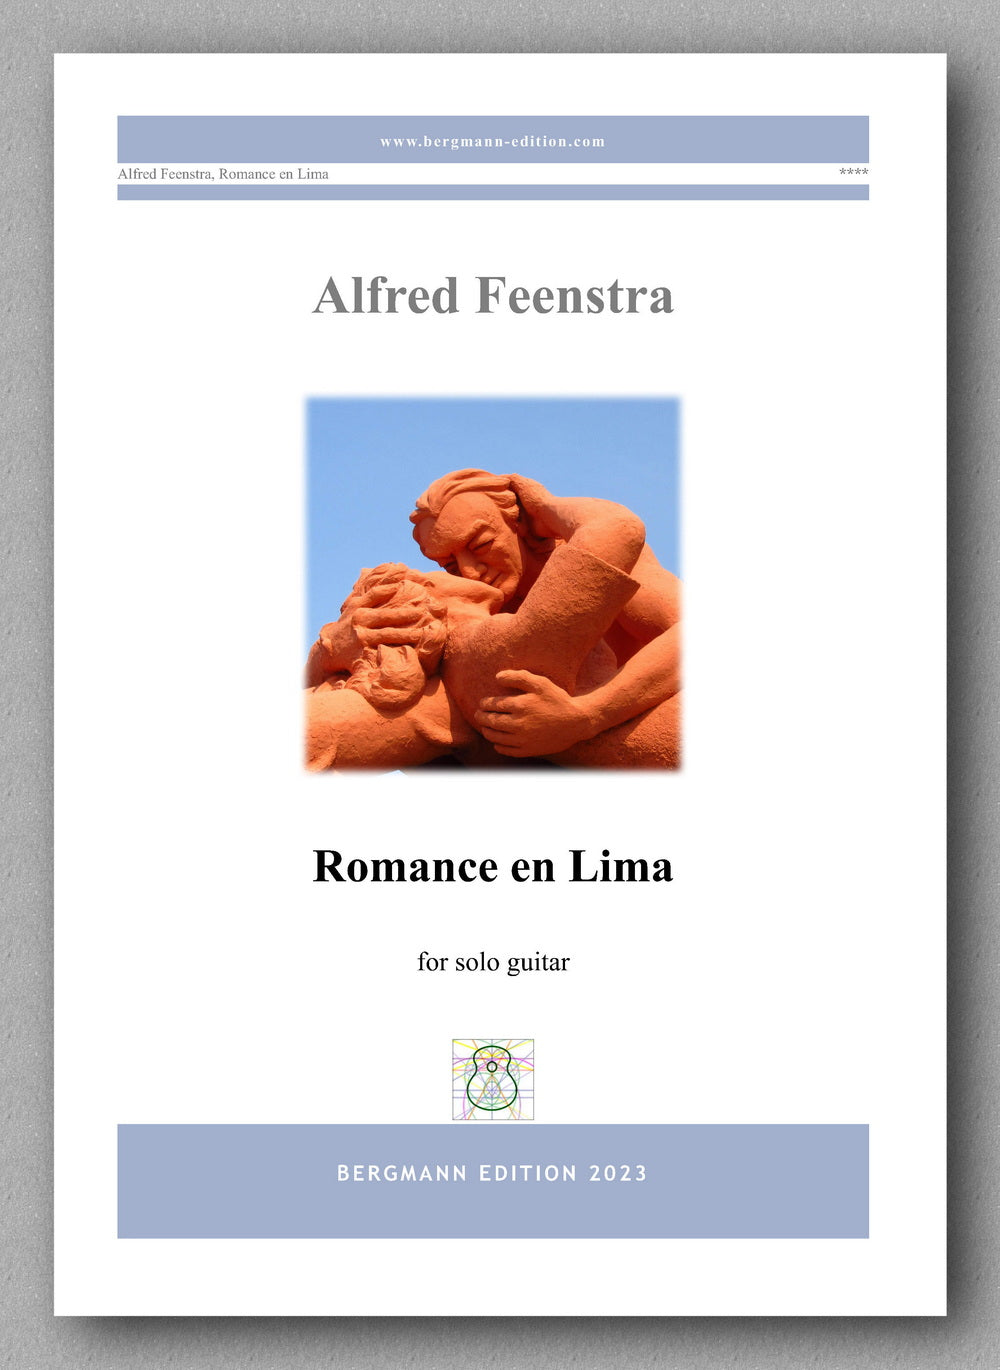 Feenstra, Romance en Lima - preview of the cover